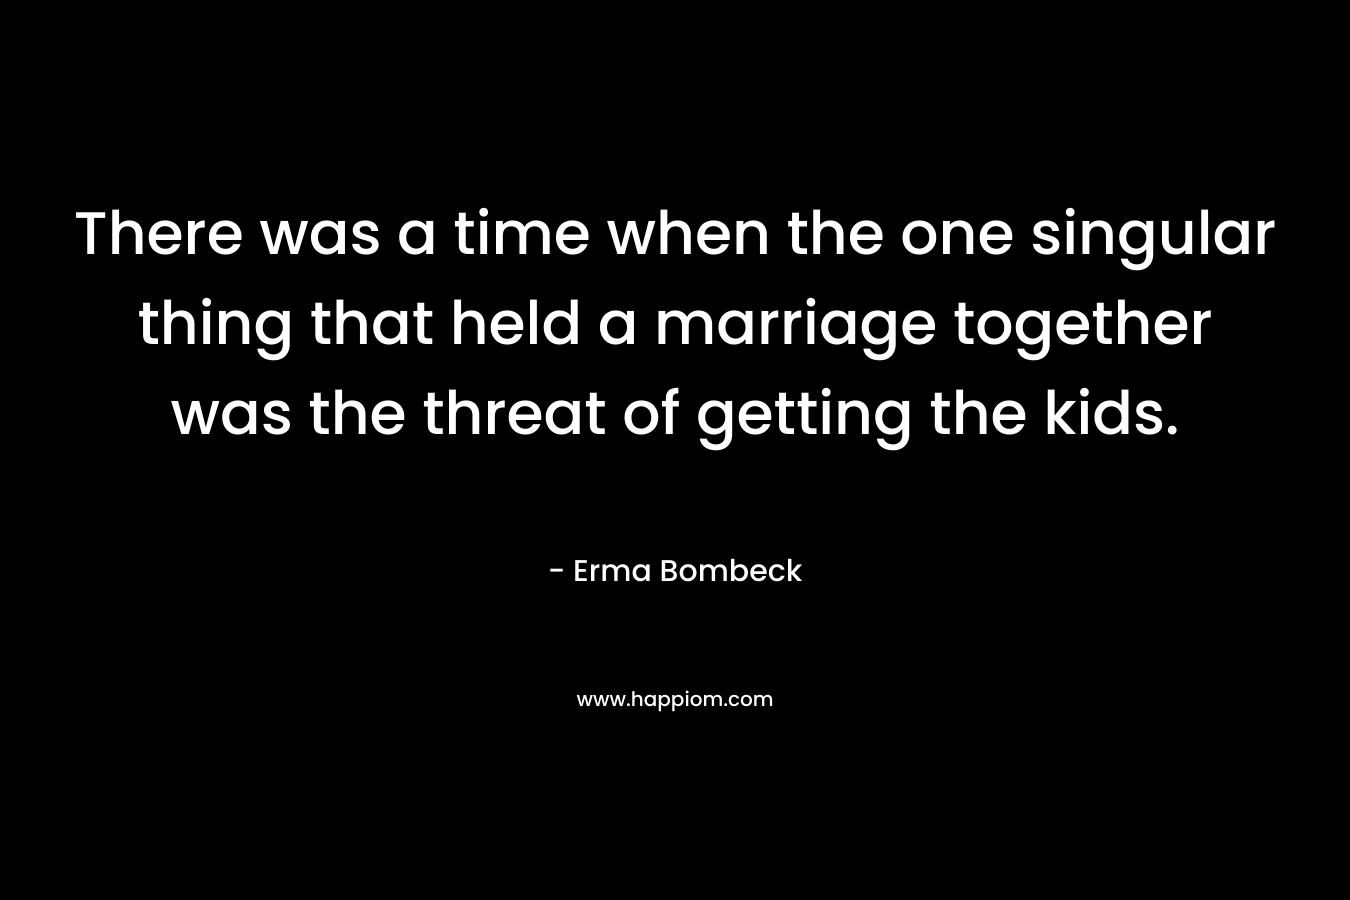 There was a time when the one singular thing that held a marriage together was the threat of getting the kids. – Erma Bombeck